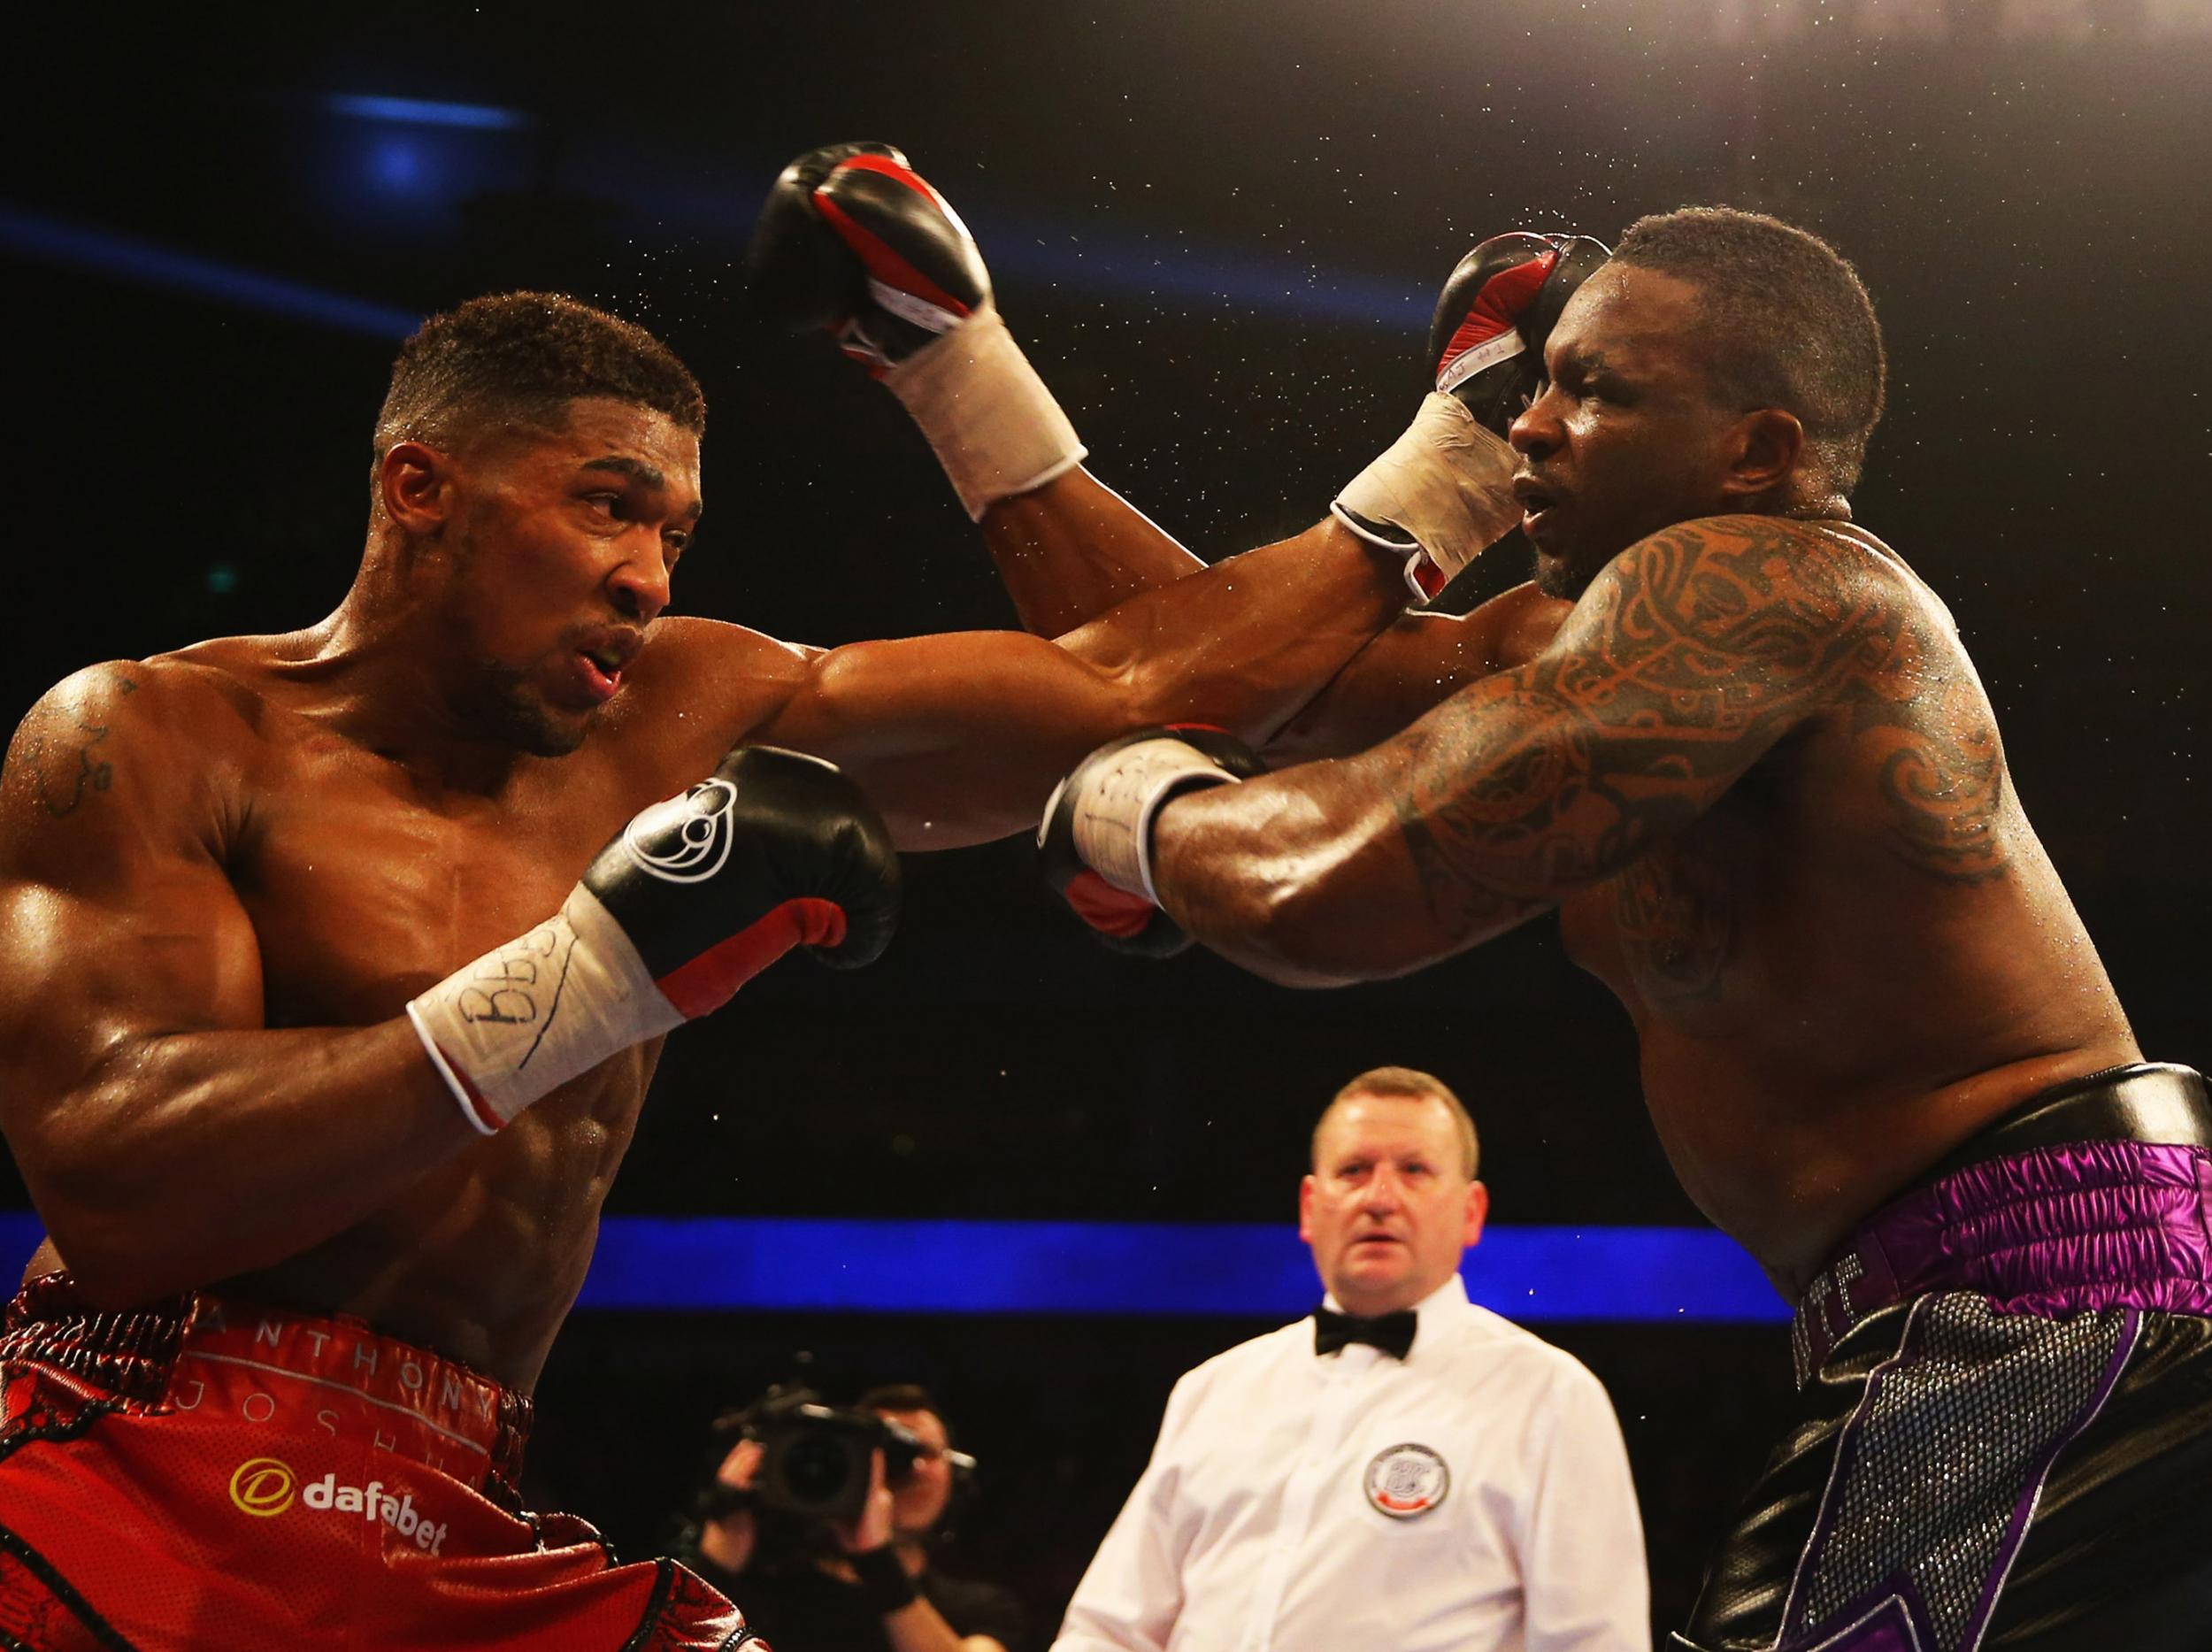 Joshua knocked out Whyte in seven rounds in 2016